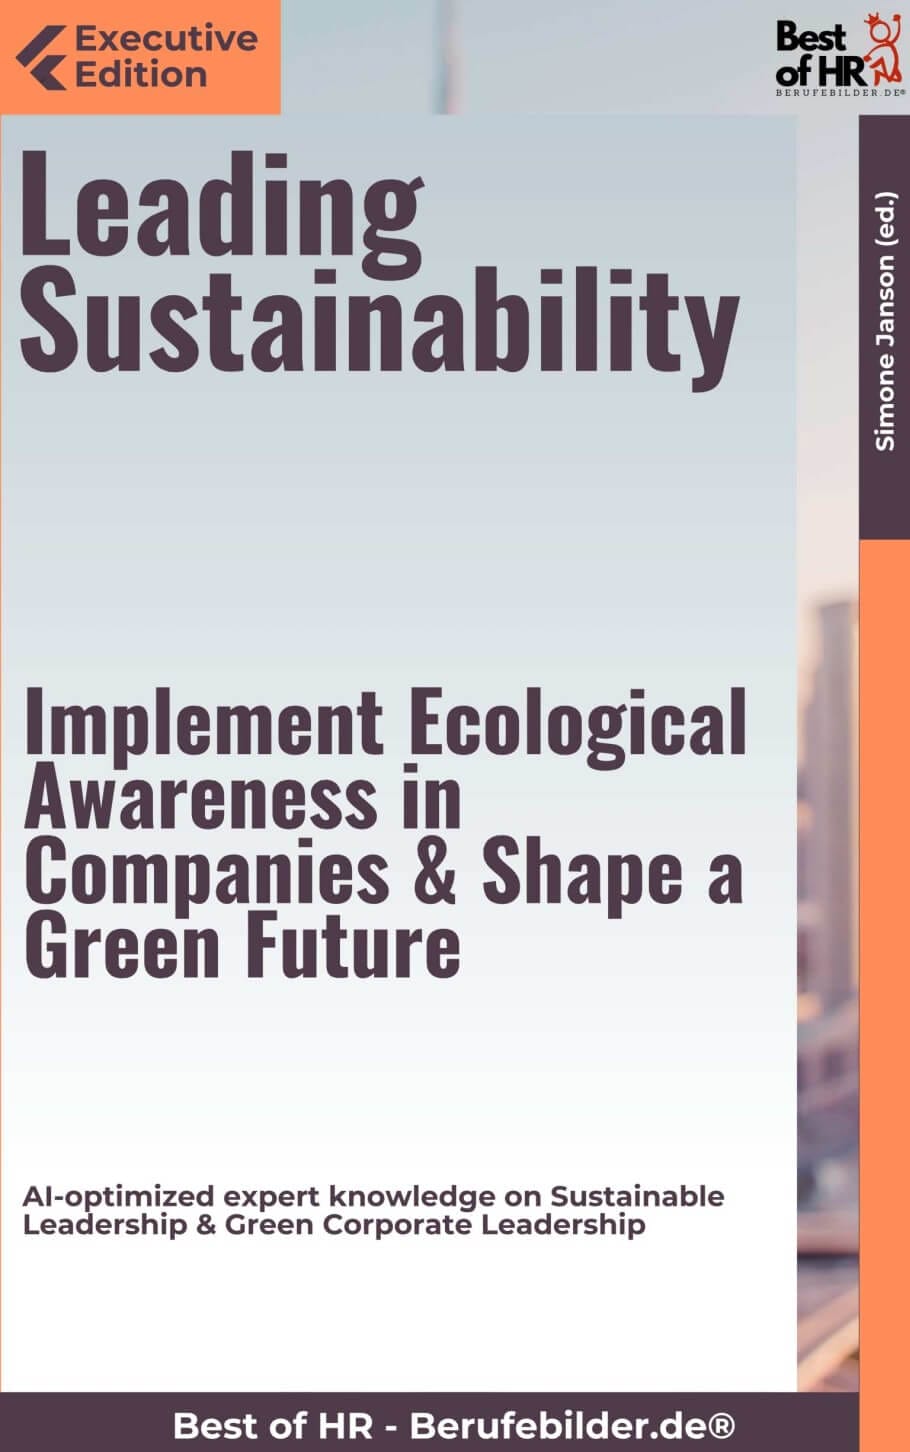 Leading Sustainability – Implement Ecological Awareness in Companies & Shape a Green Future (Engl. Version)